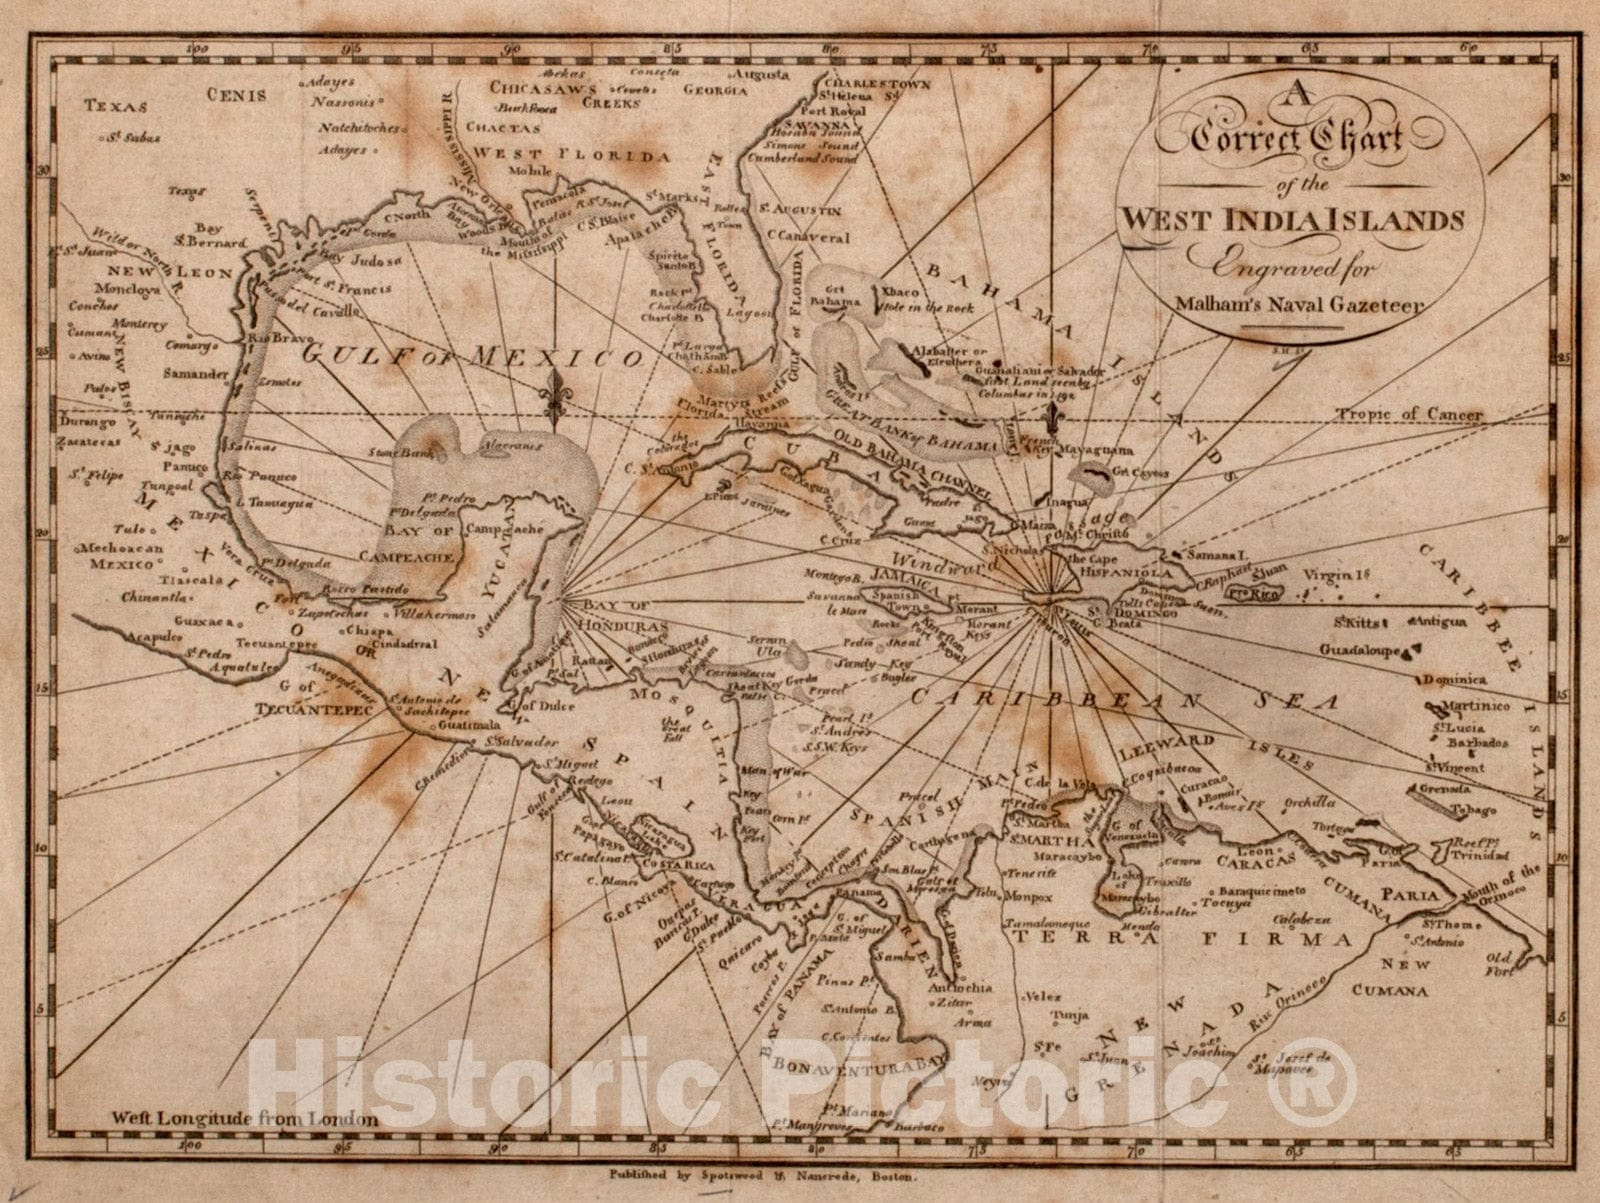 Historical Map, 1797 A Correct chart of the West India islands : engraved for Malham's naval gazetteer, Vintage Wall Art